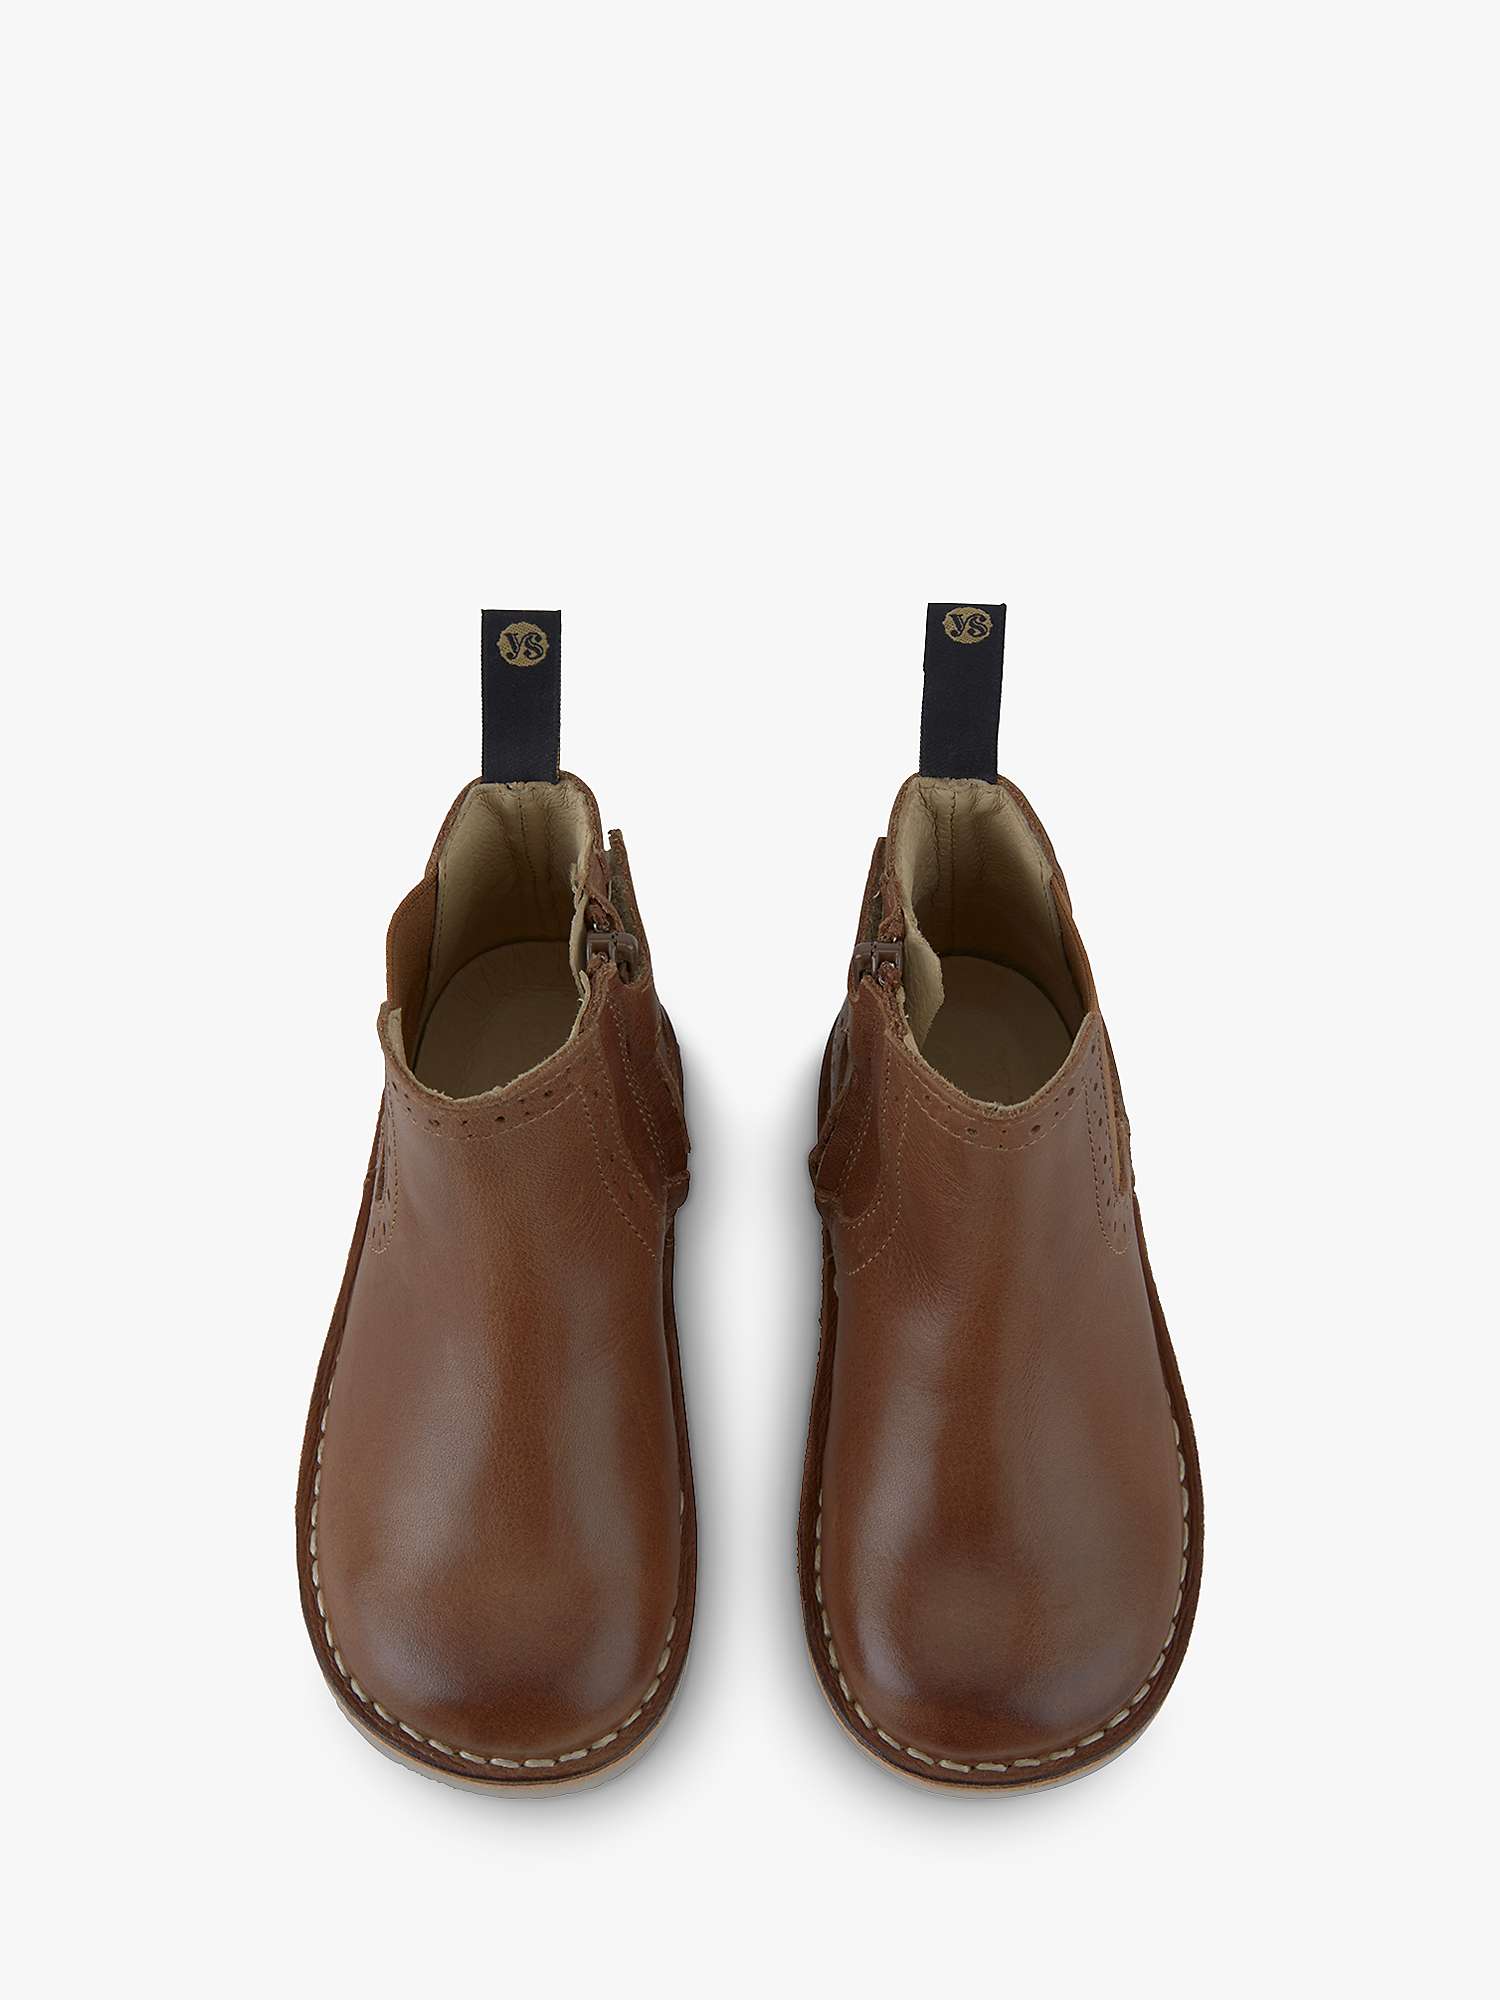 Buy Young Soles Kids' Marlowe Leather Chelsea Boots Online at johnlewis.com